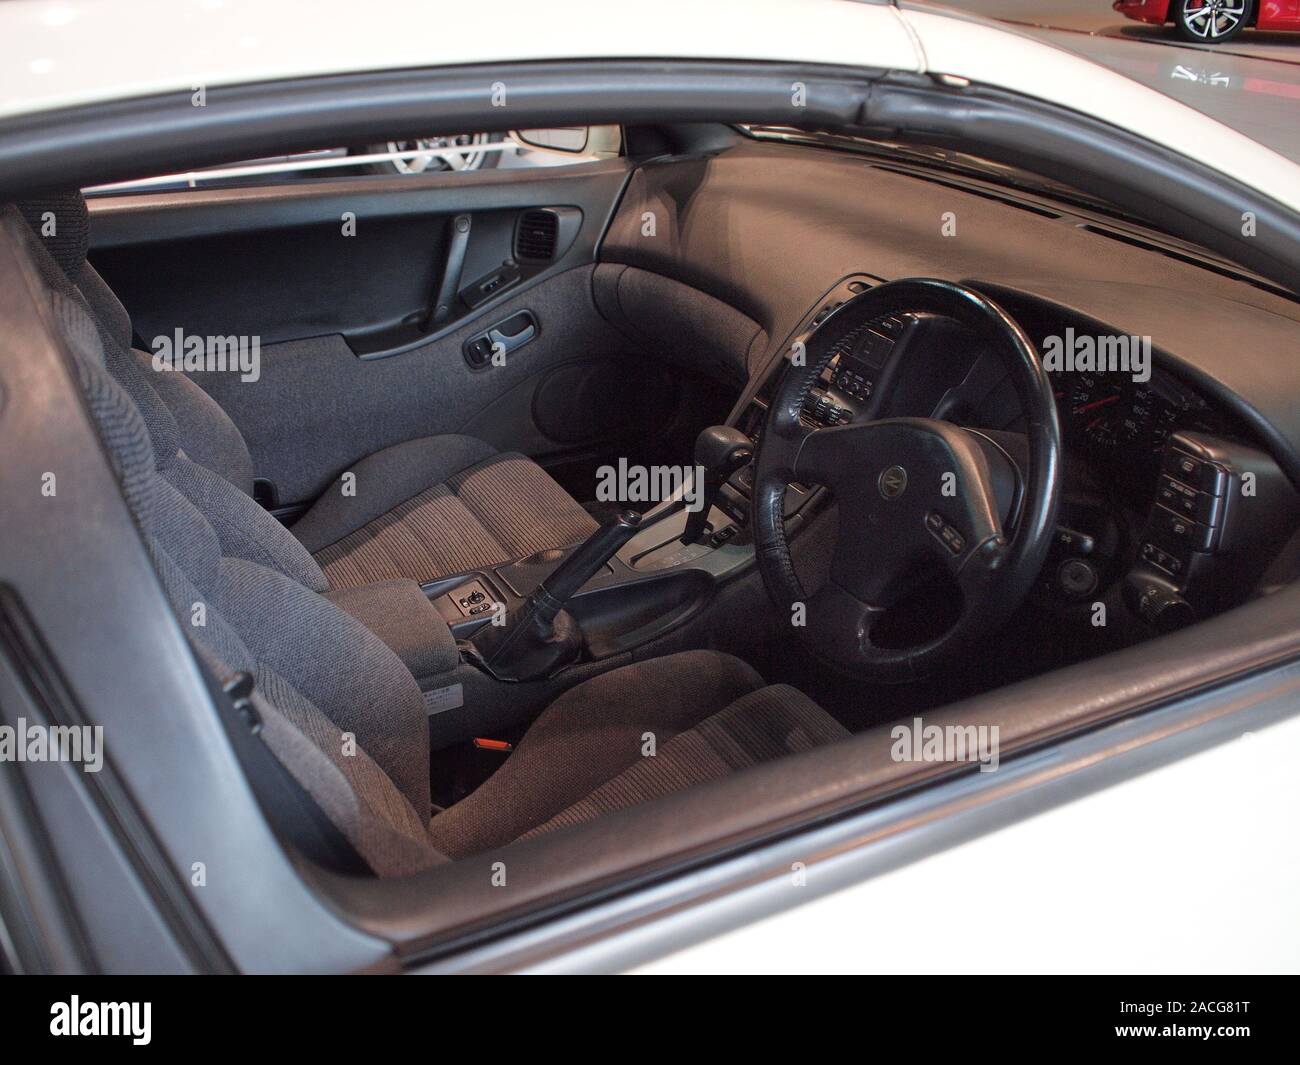 1989 Nissan Fairlady Z 2by2 300ZX Twin-Turbo at the NIssan Global Headquarters Gallery. Stock Photo